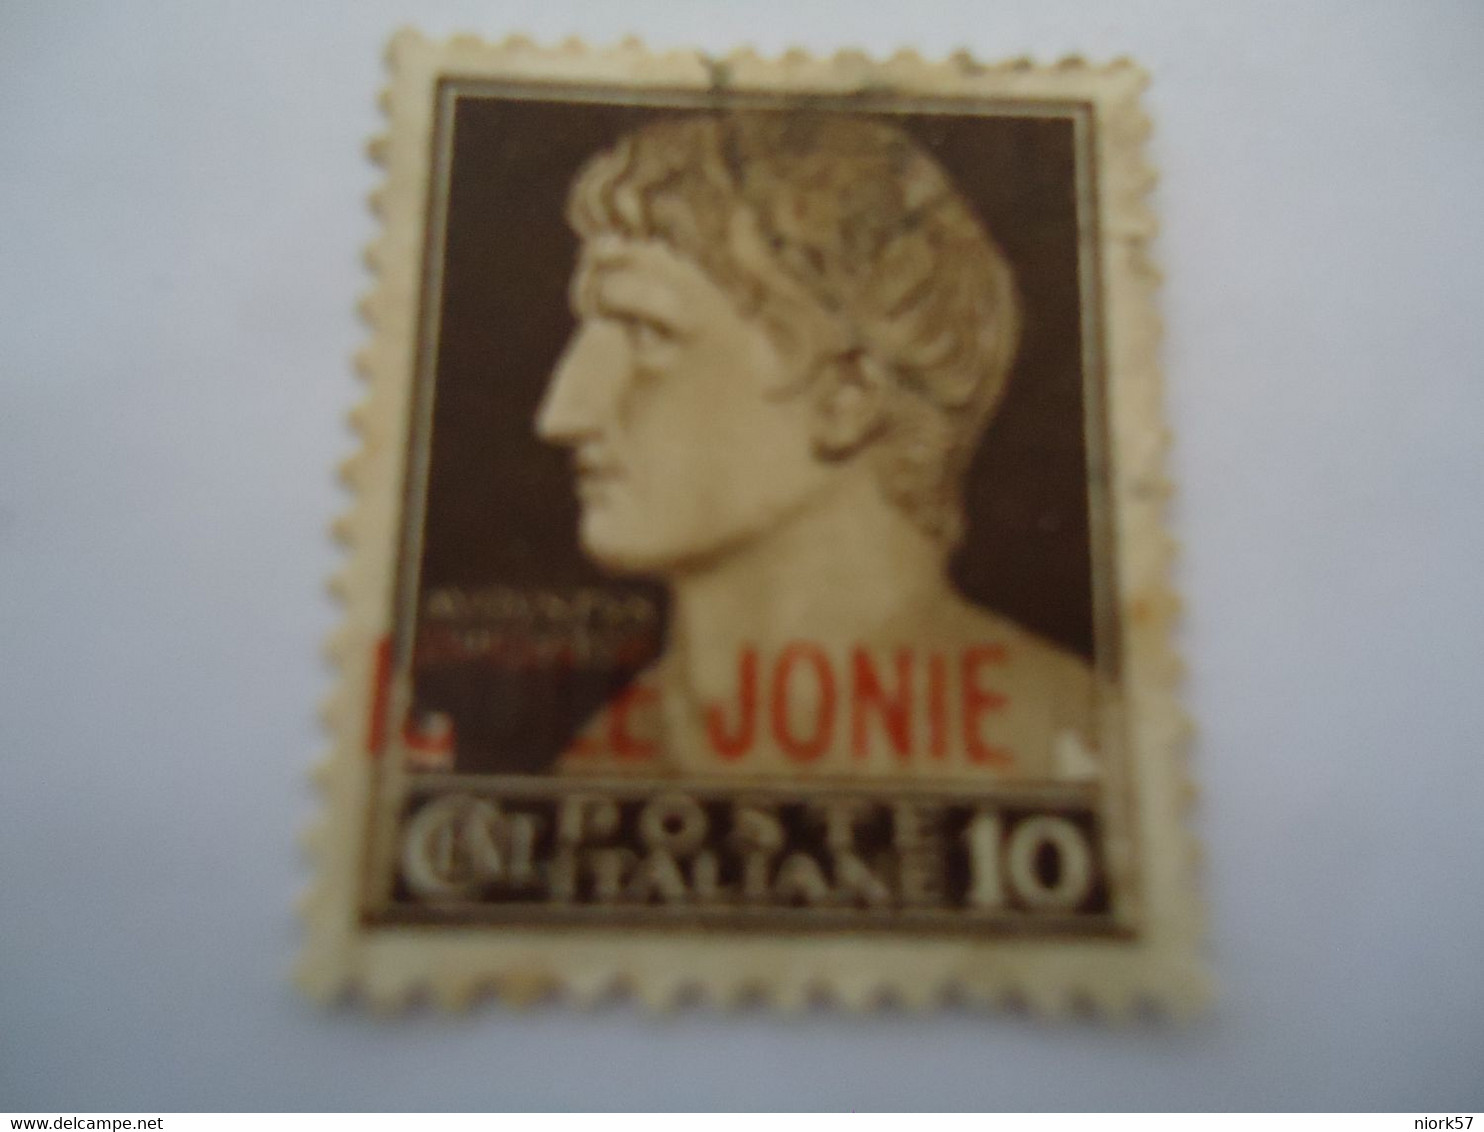 GREECE  USED ITALY   STAMPS JONIE - Isole Ioniche